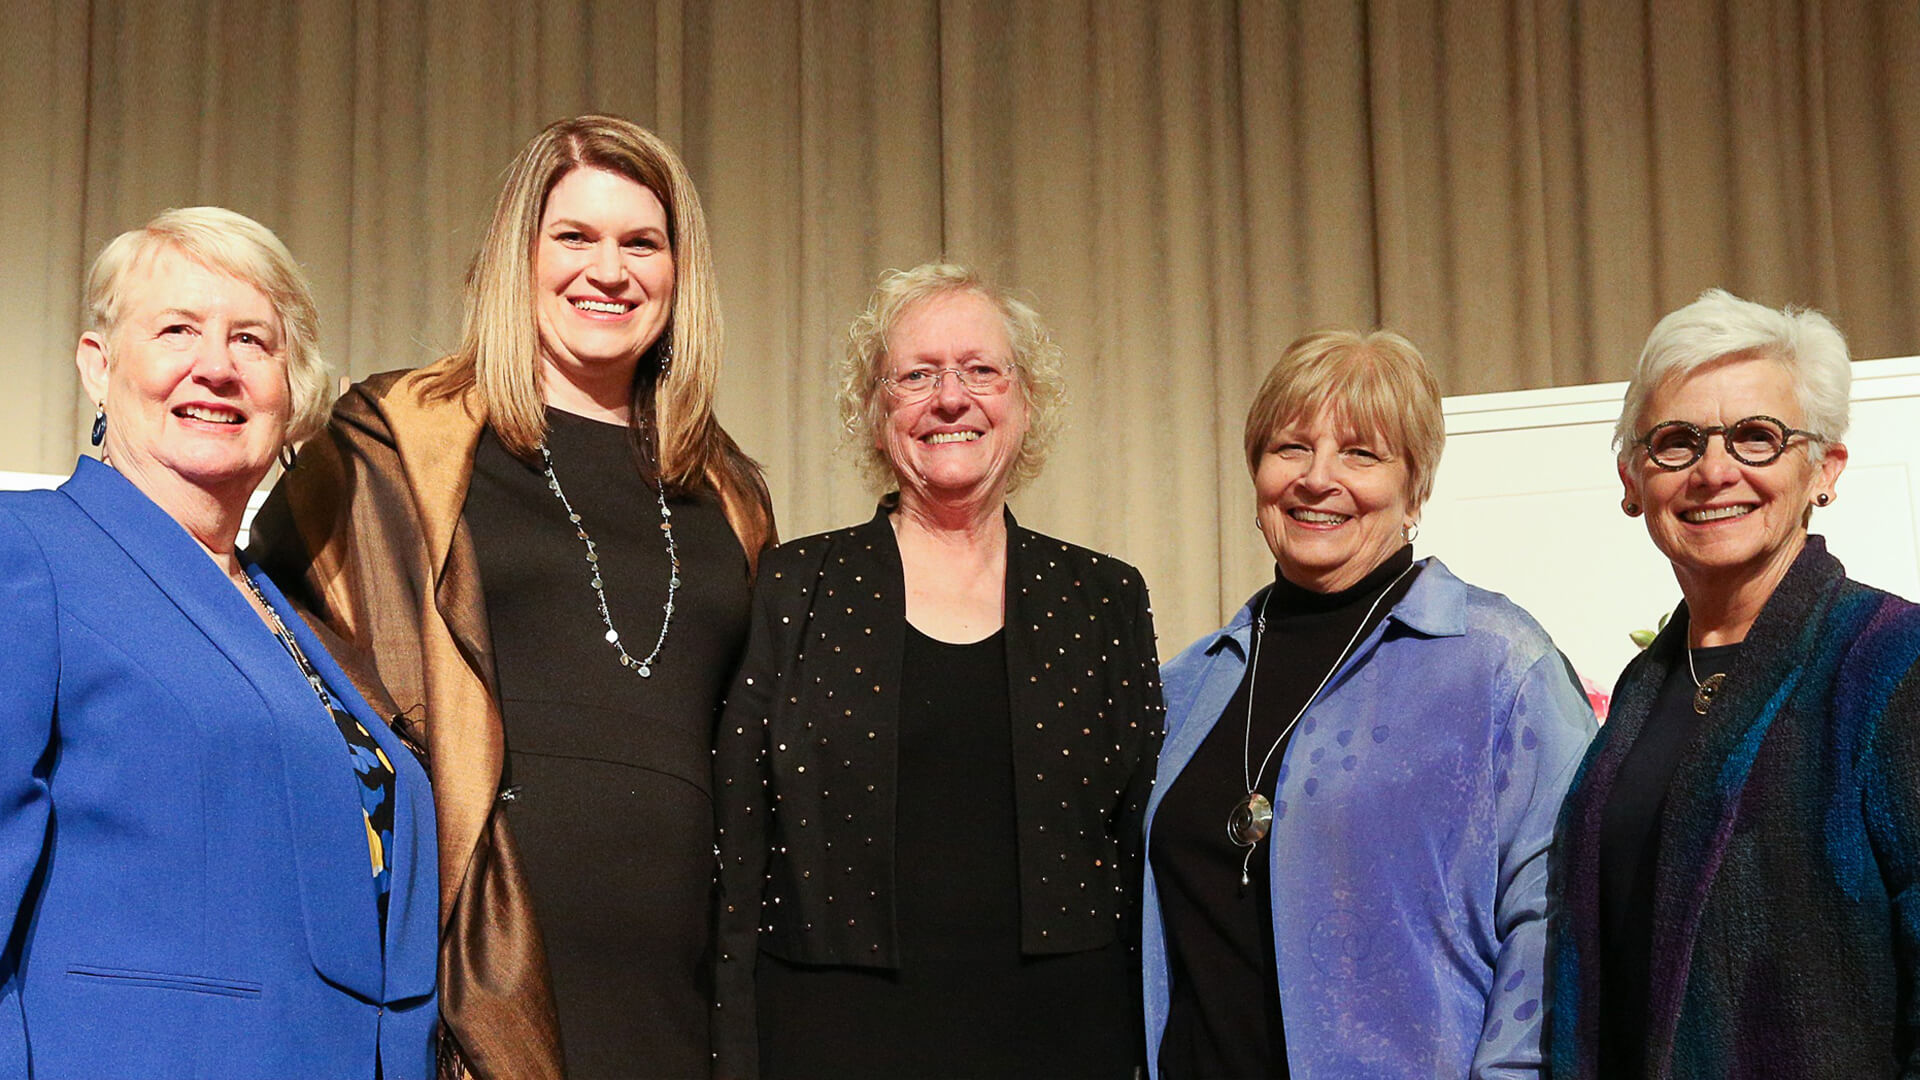 Current and former Purdue Women in Engineering Program directors Donna Frohreich McKenzie, Beth Holloway, Jane Zimmer Daniels and Marie McKee pose for a photo with Leah Jamieson, center, the university’s John A. Edwardson Dean of Engineering from 2006-17.